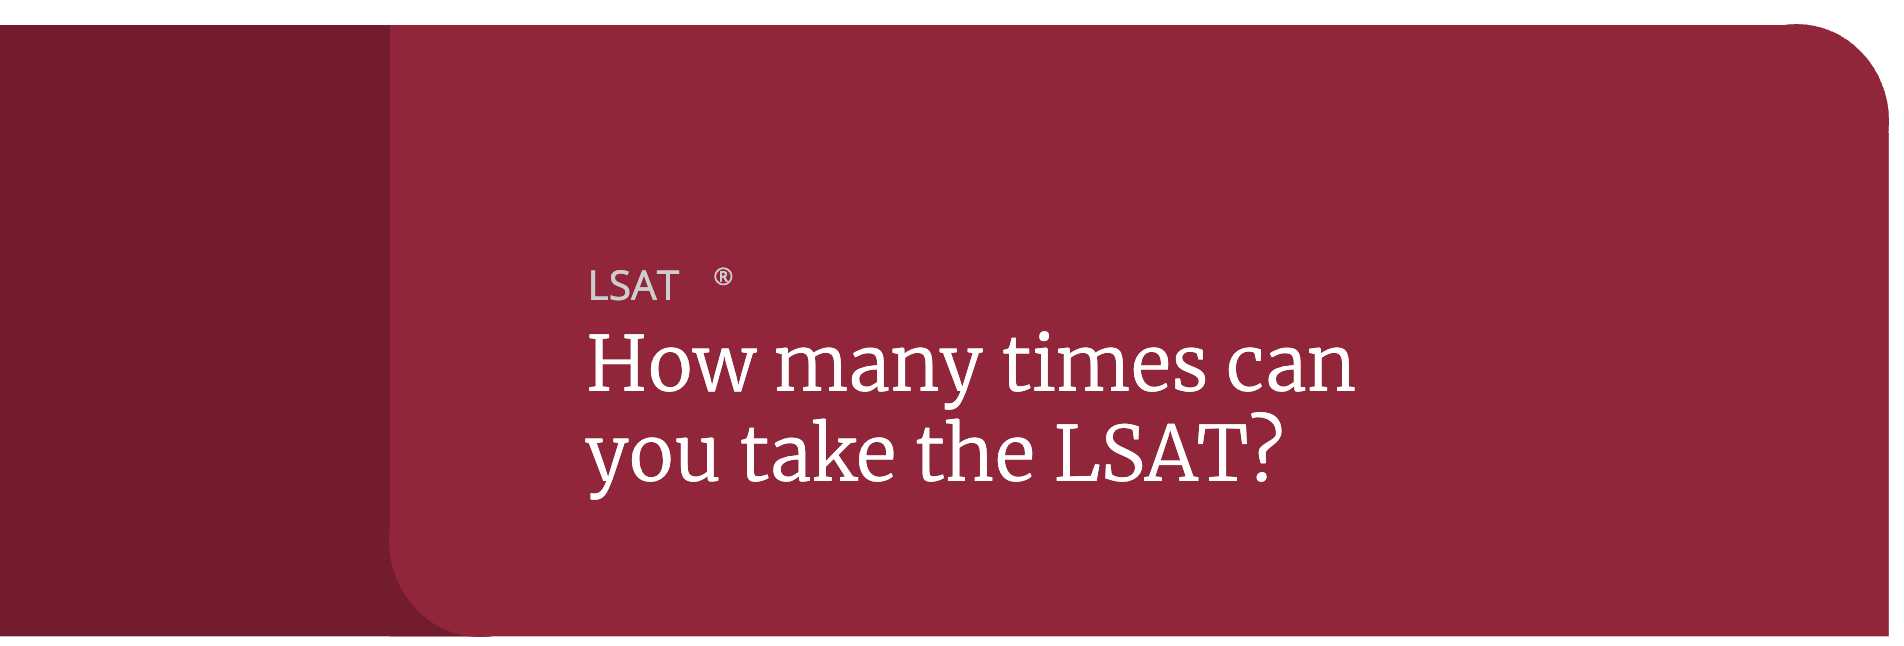 How many times can I take the LSAT?